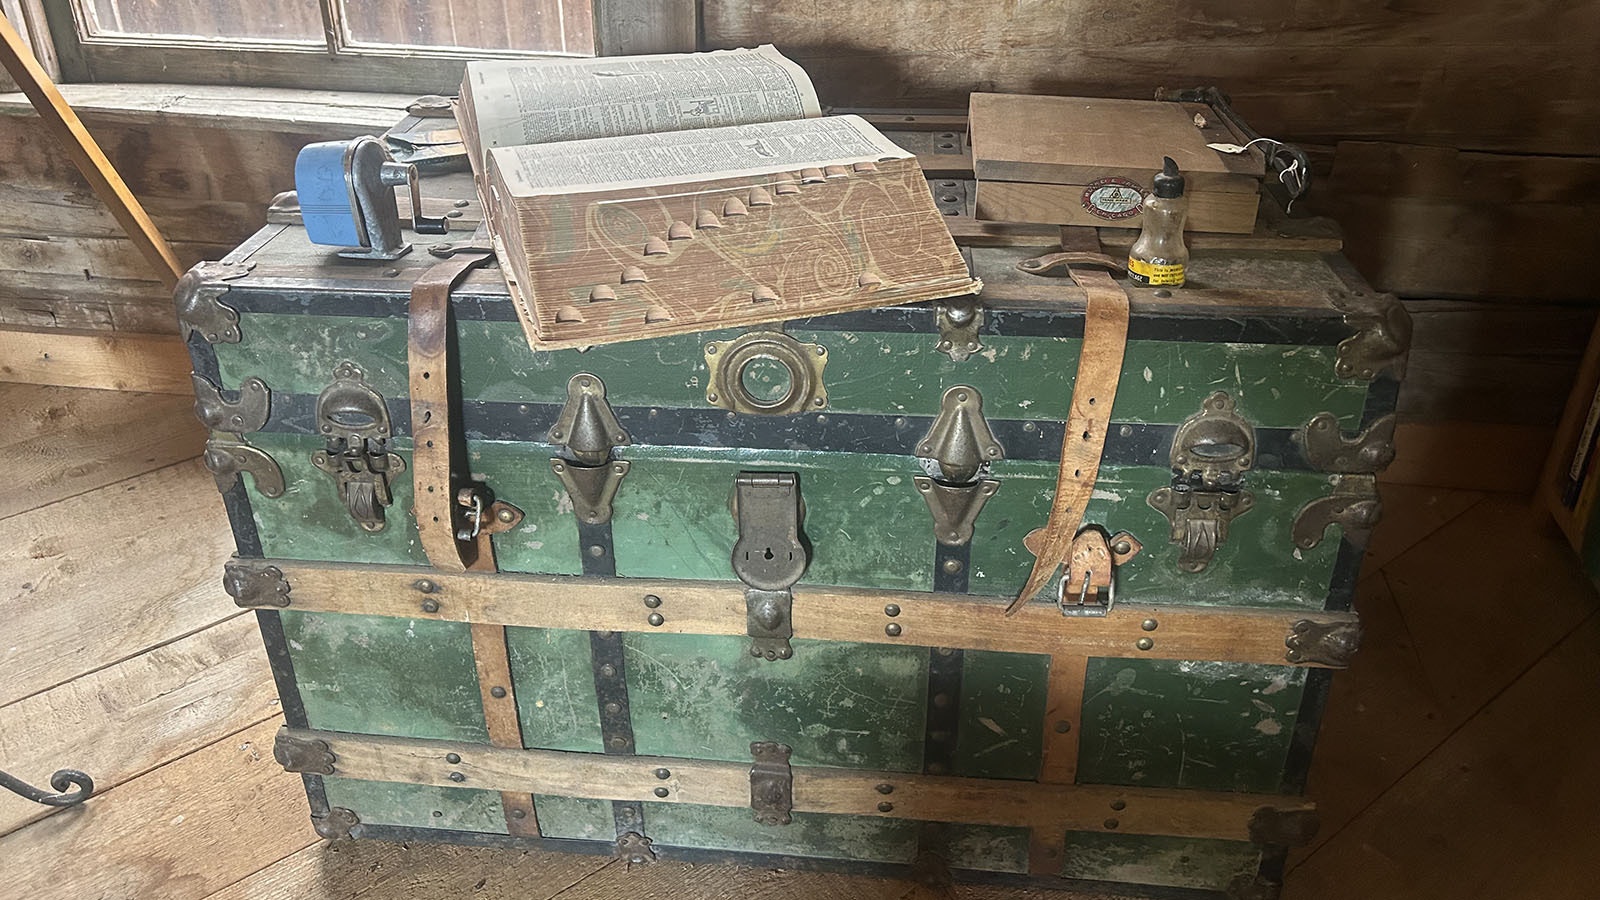 Education’s tools on display at the Price/Sommers Schoolhouse. This photo shows a trunk with a pencil sharpener, paper cutter and large dictionary.